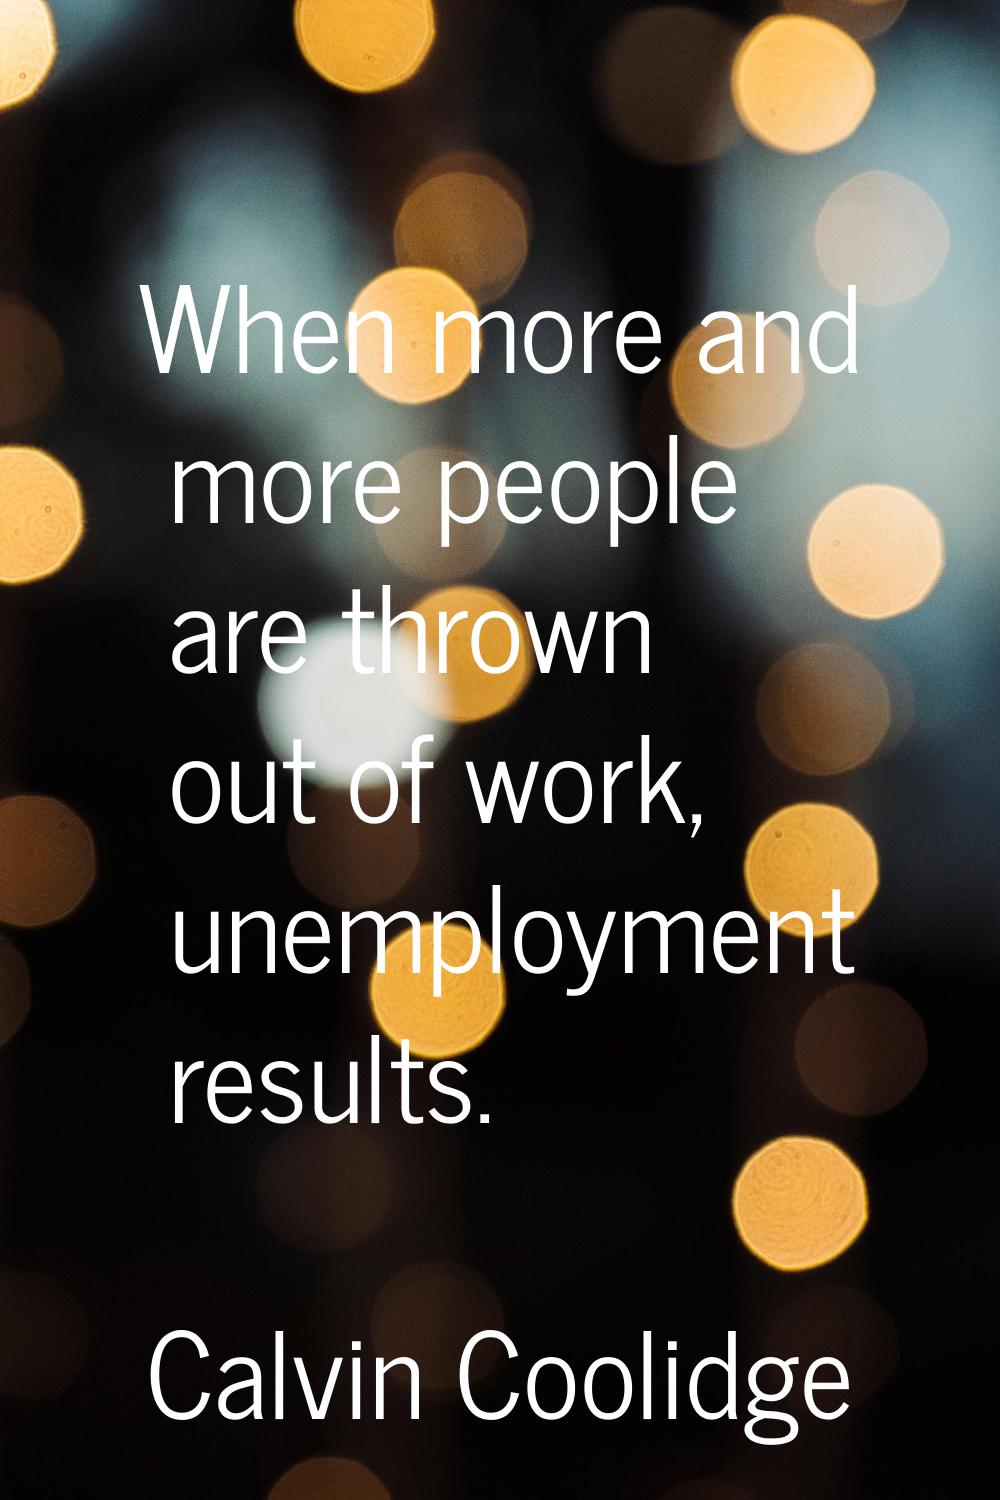 When more and more people are thrown out of work, unemployment results.